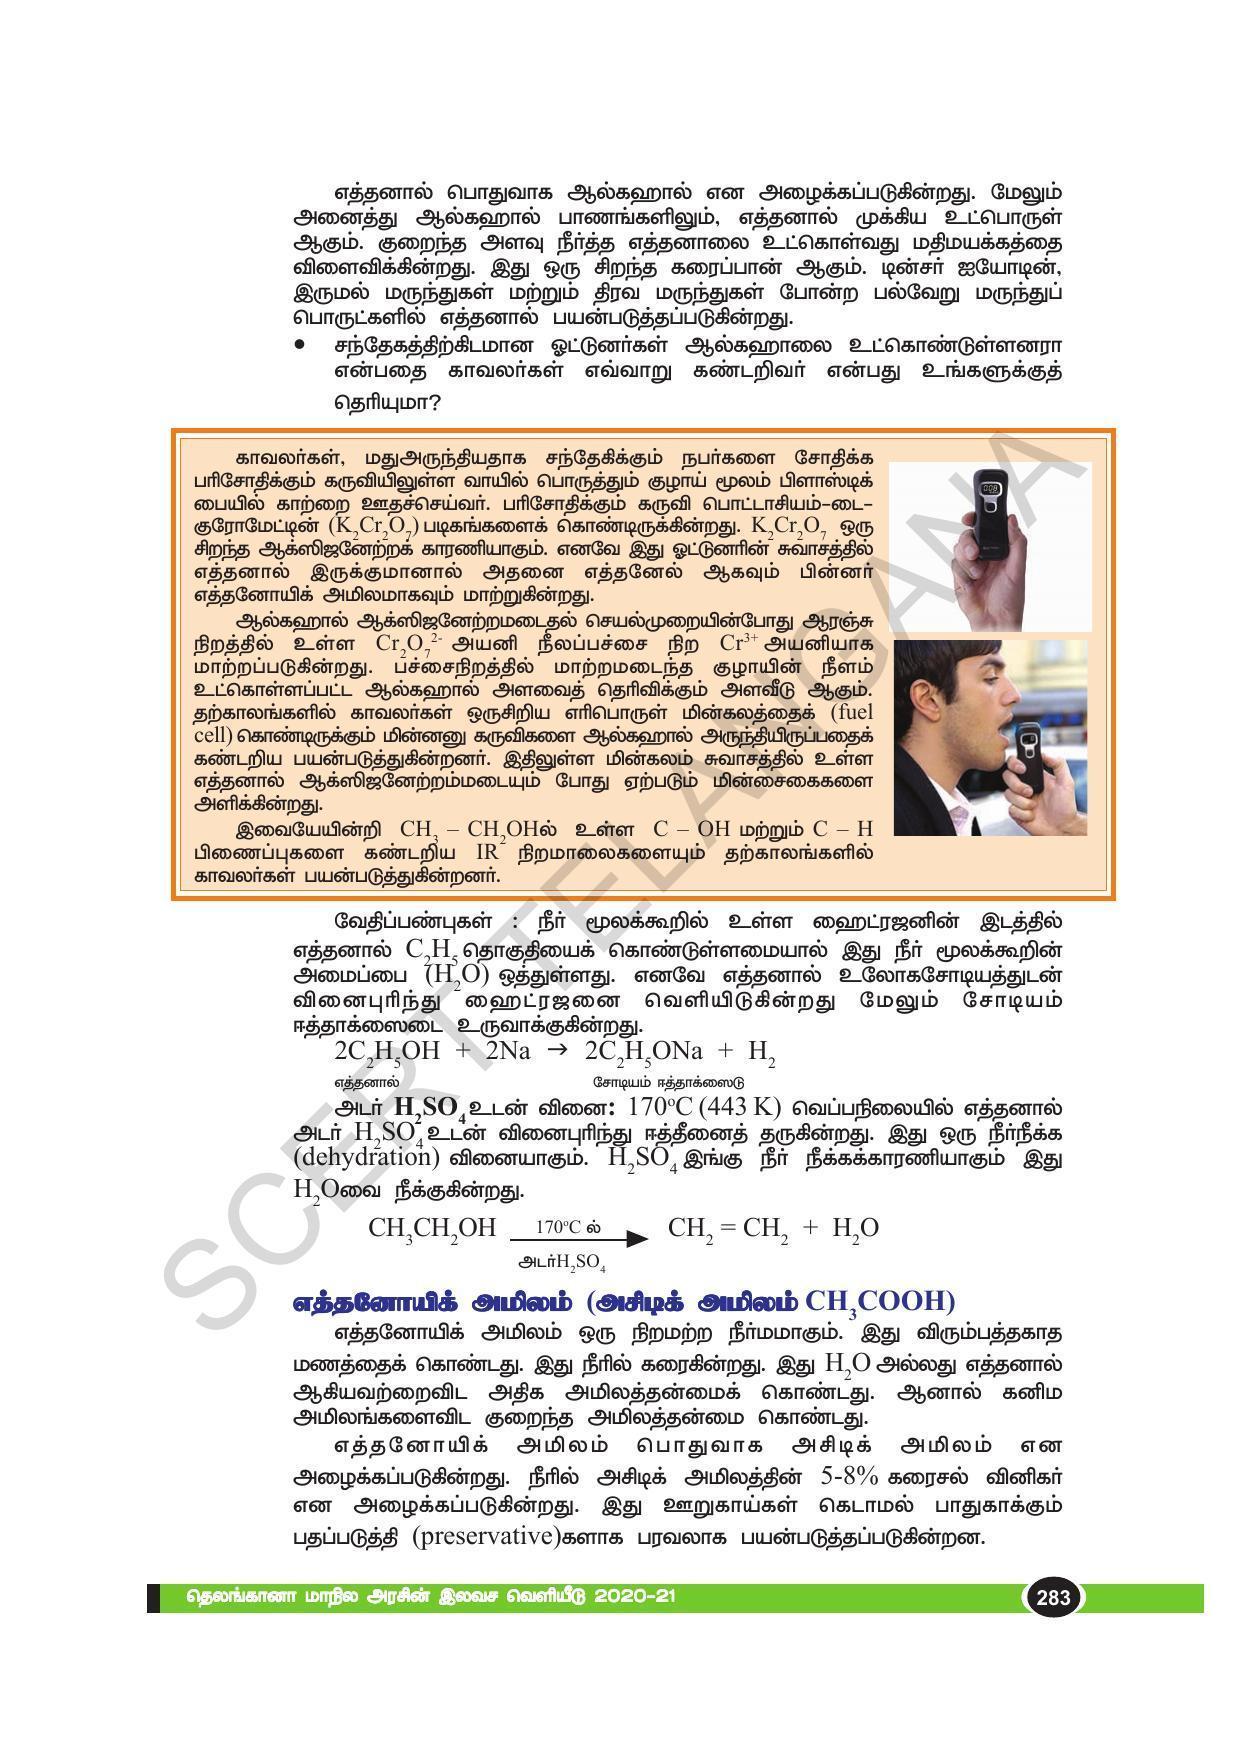 TS SCERT Class 10 Physical Science(Tamil Medium) Text Book - Page 295